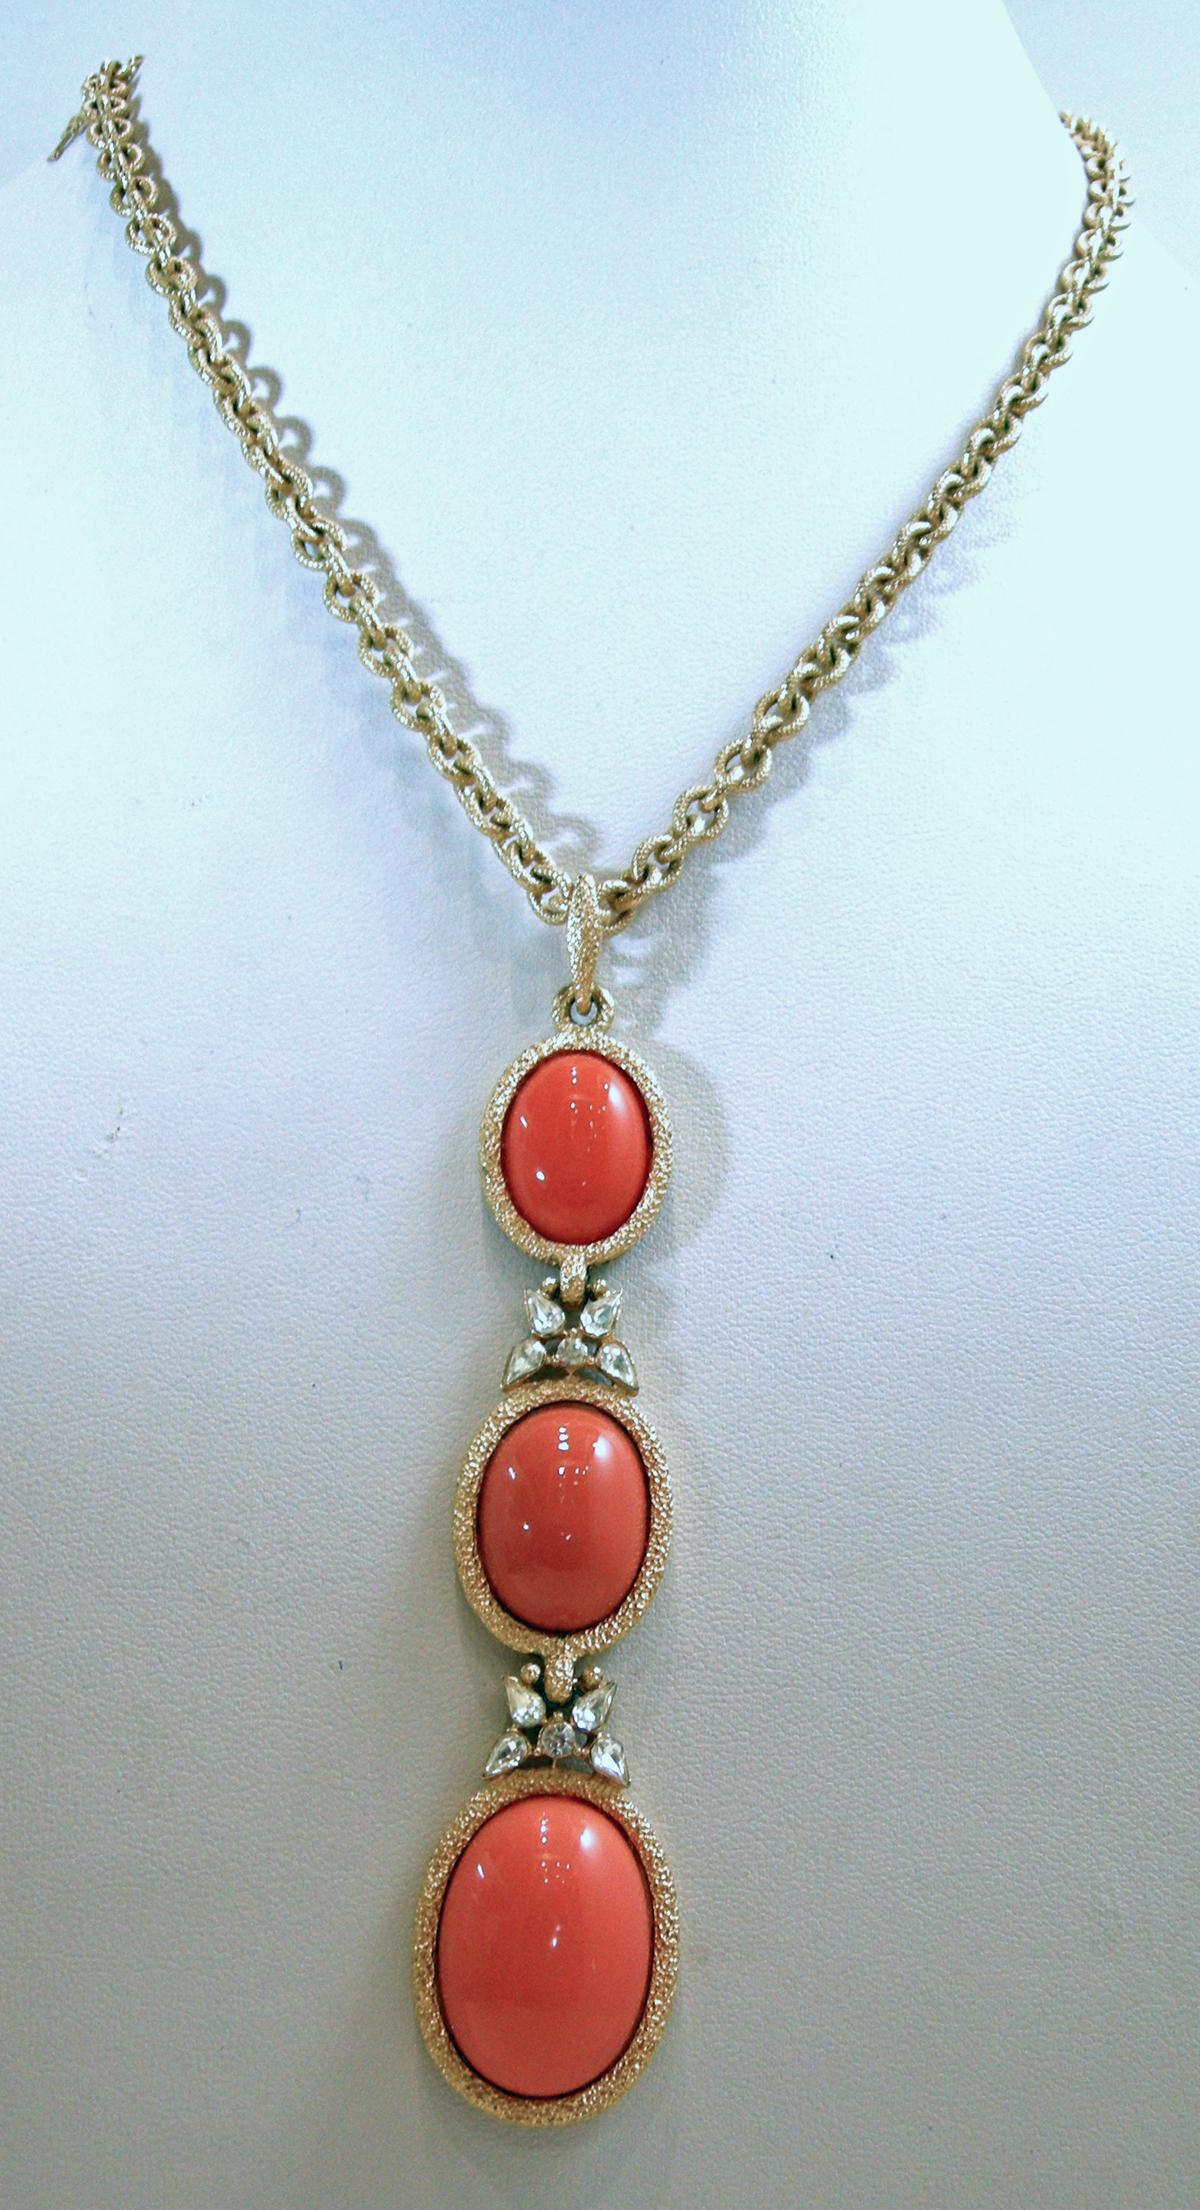 This vintage signed Trifari set has faux coral stones in a gold tone setting.  The necklace has a chain with a centerpiece with three faux coral drops and crystal accents. The necklace measures 16” long with a hook clasp.  The centerpiece is 3-3/4”